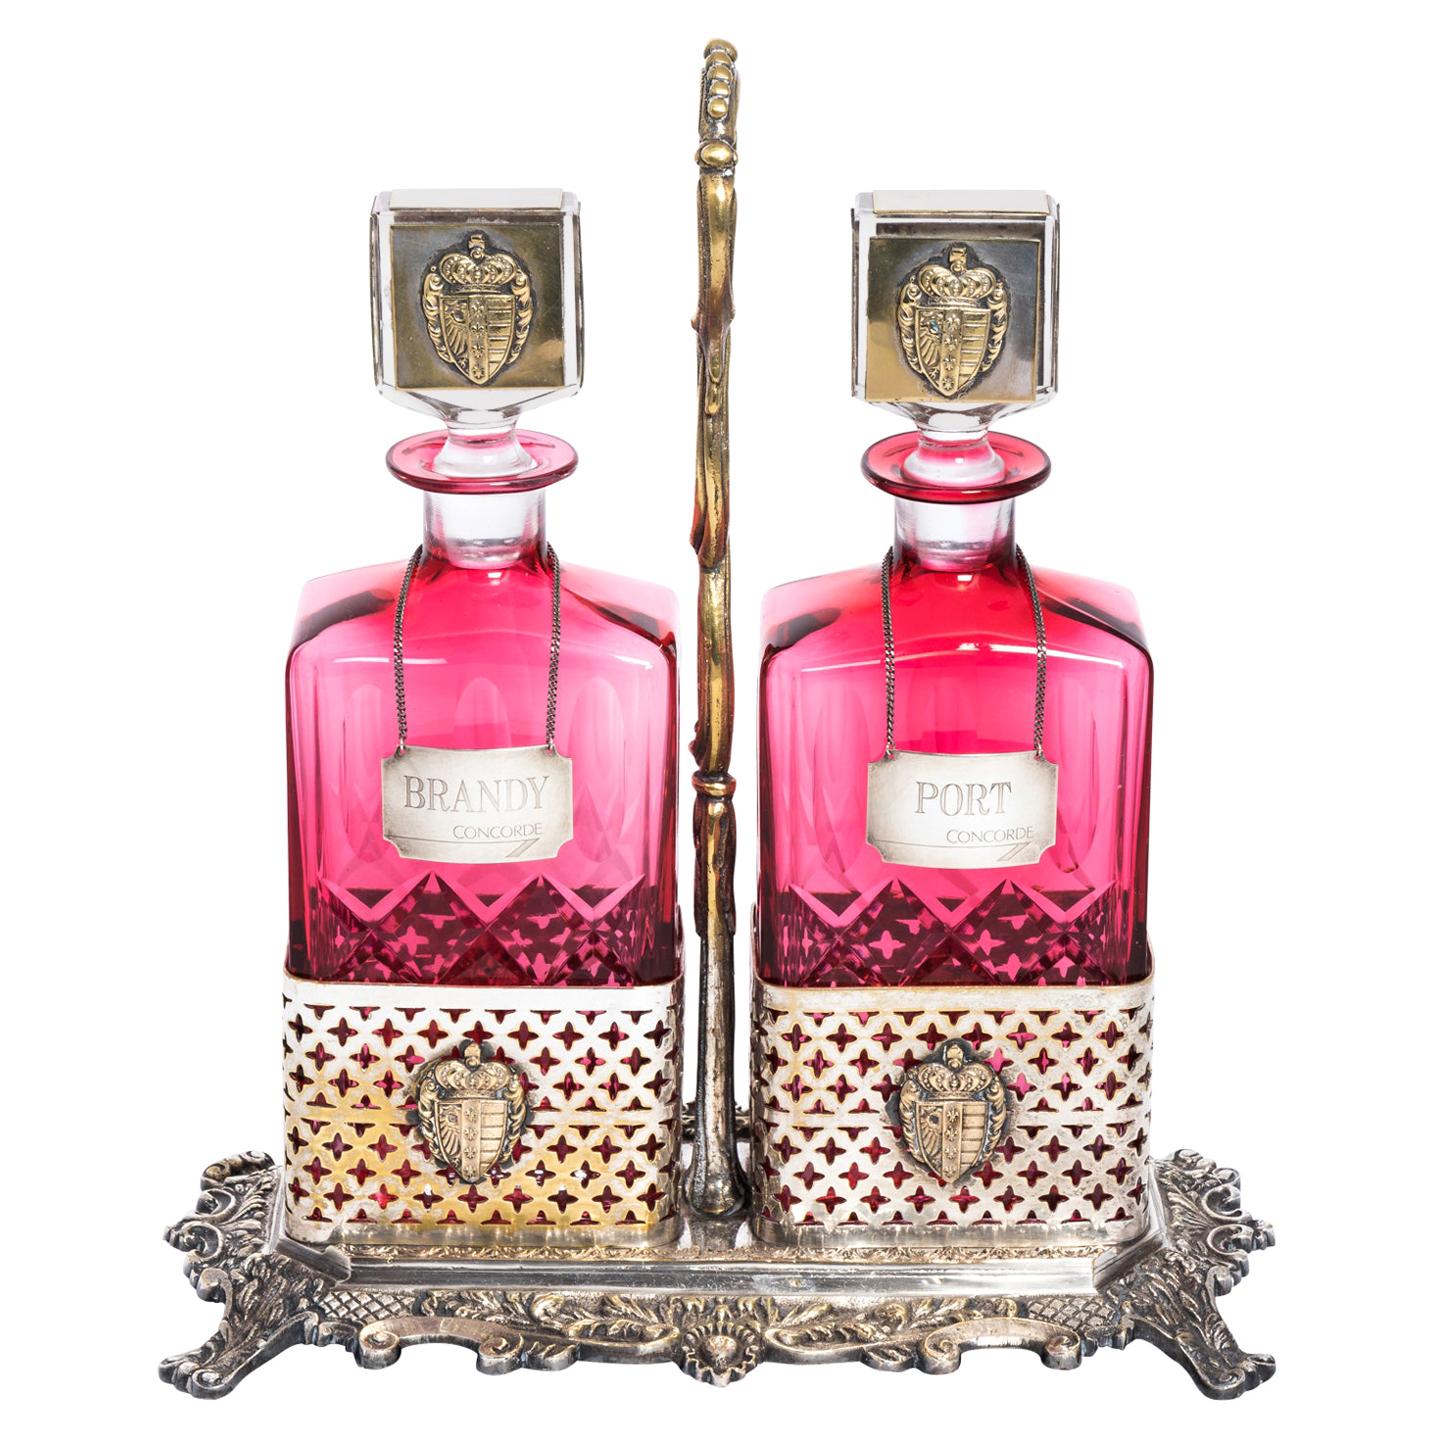 Cranberry/Cut Crystal Decanter Set English Ornate Plated Holder